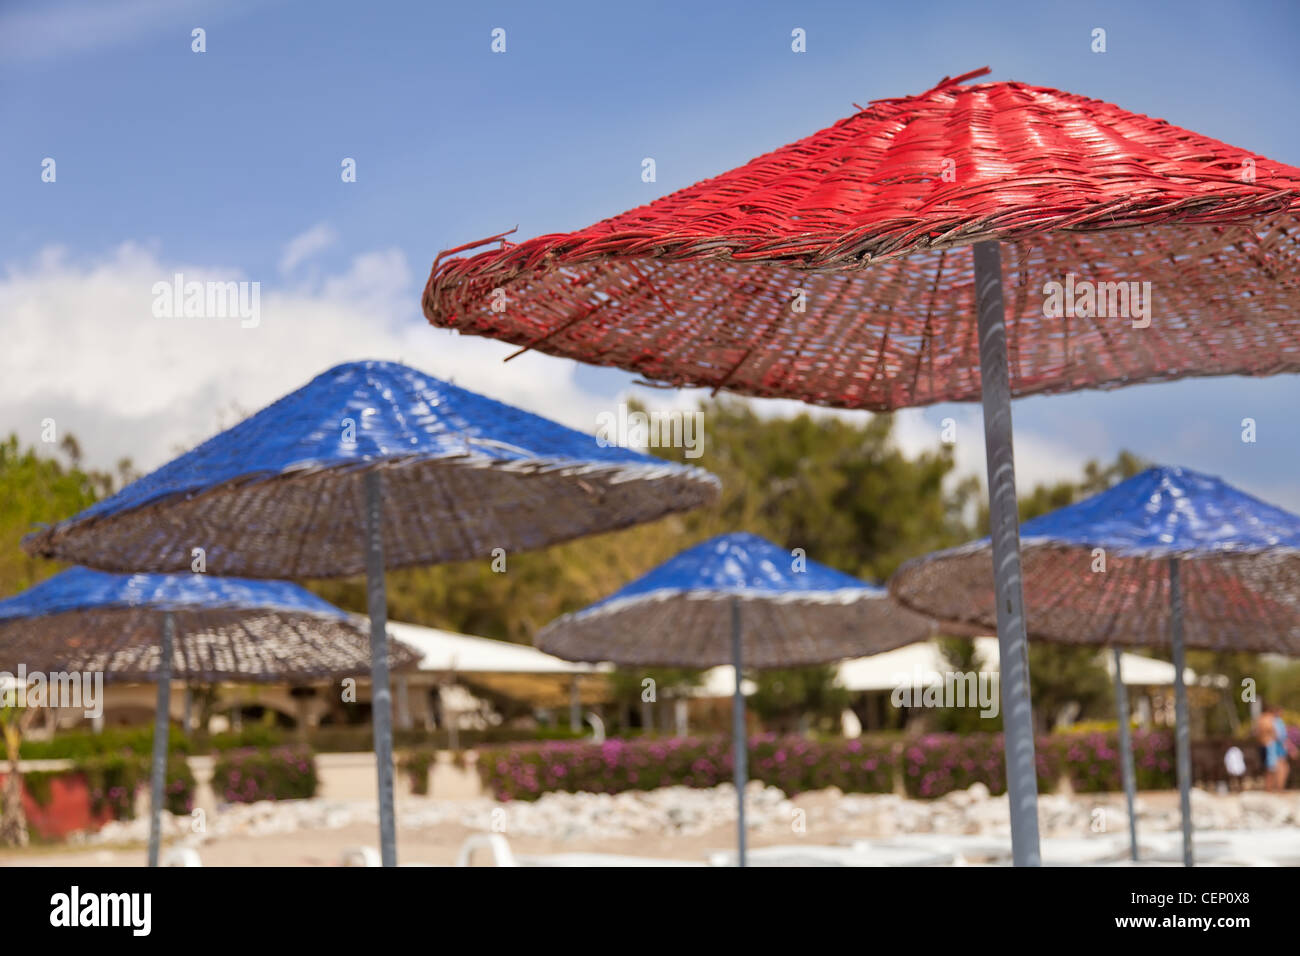 Beach umbrella made from red and blue straw closeup view Stock Photo